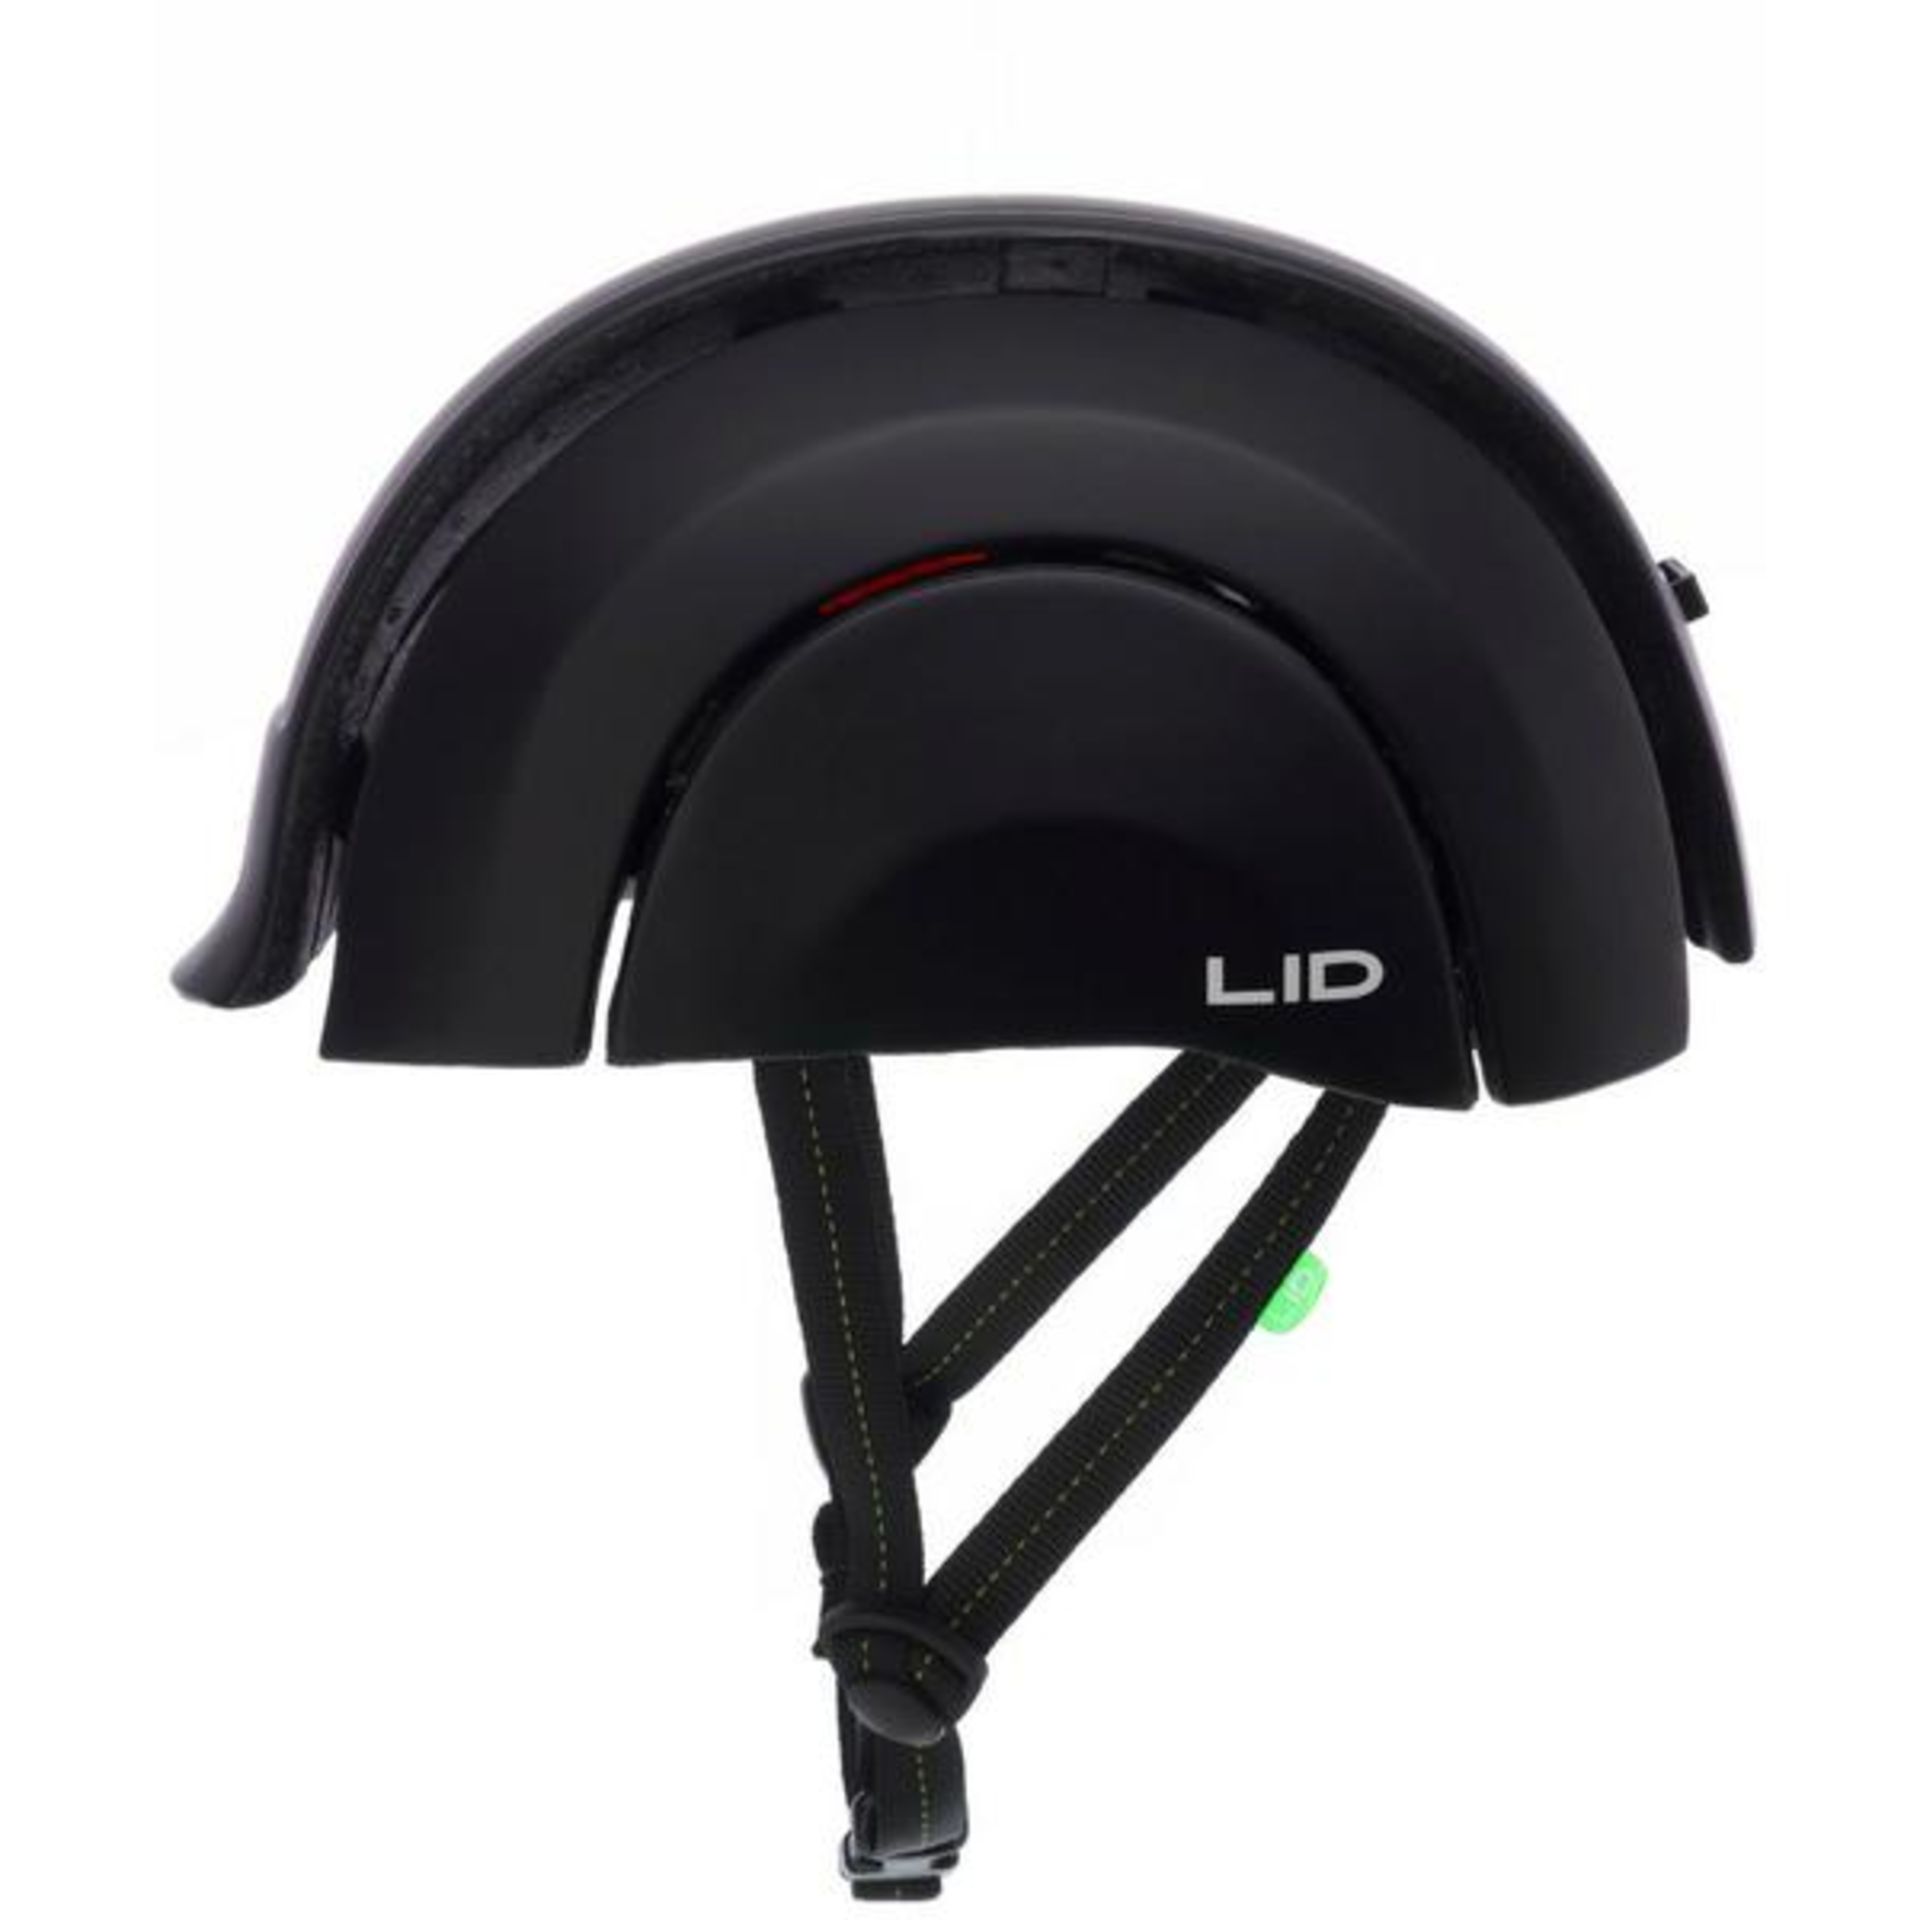 Lid Helmet Liquidation - Over £153k at retail - All new and boxed